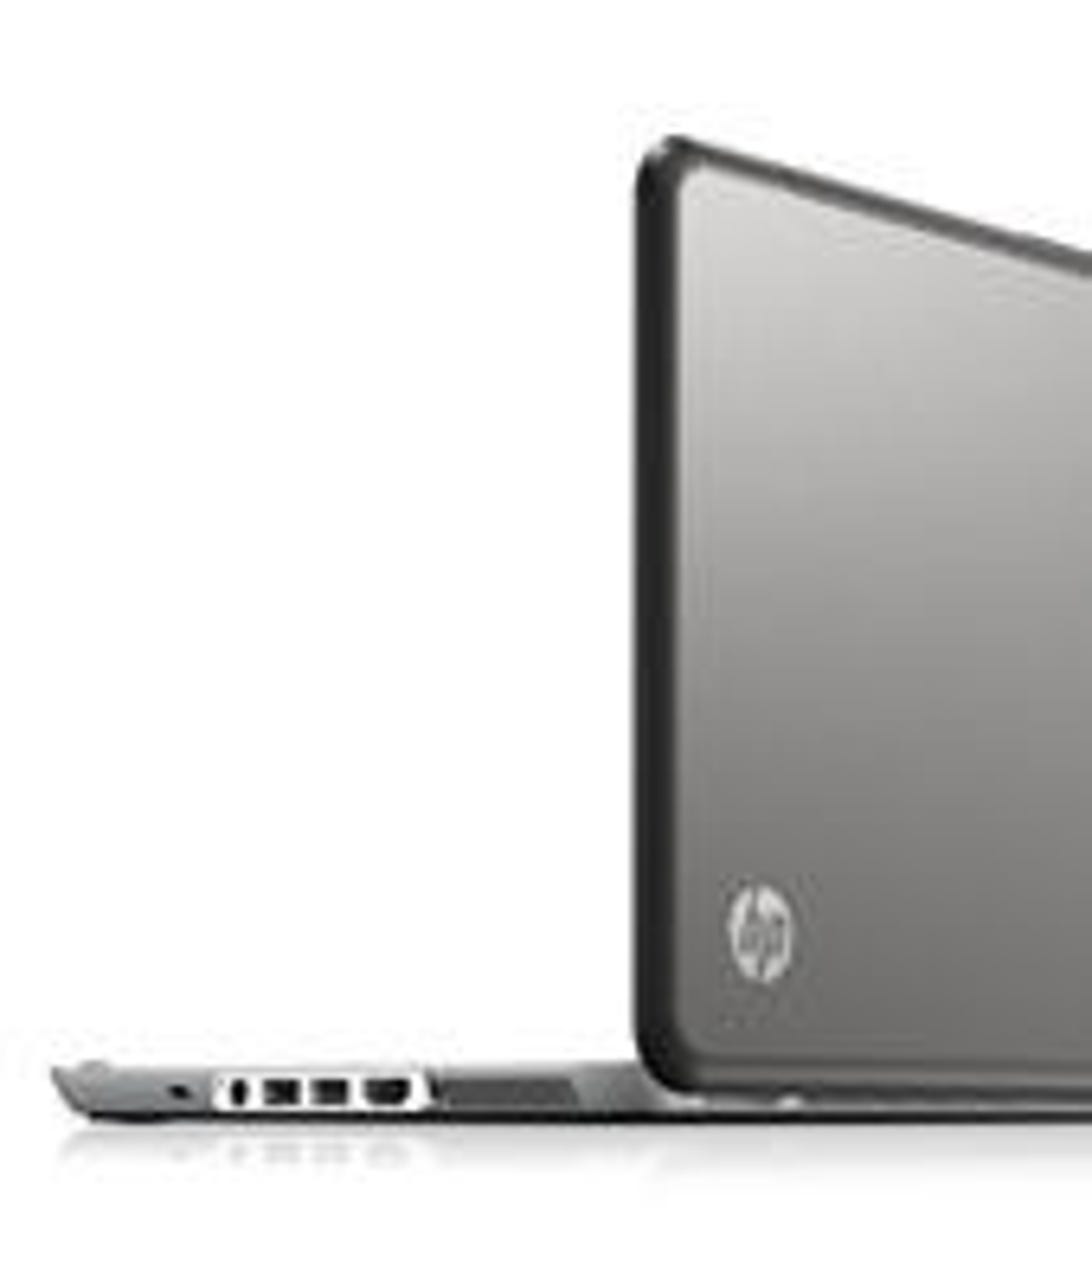 HP Envy 13: like the 13-inch MacBook Air and Dell Adamo 13, it has an all-metal chassis.